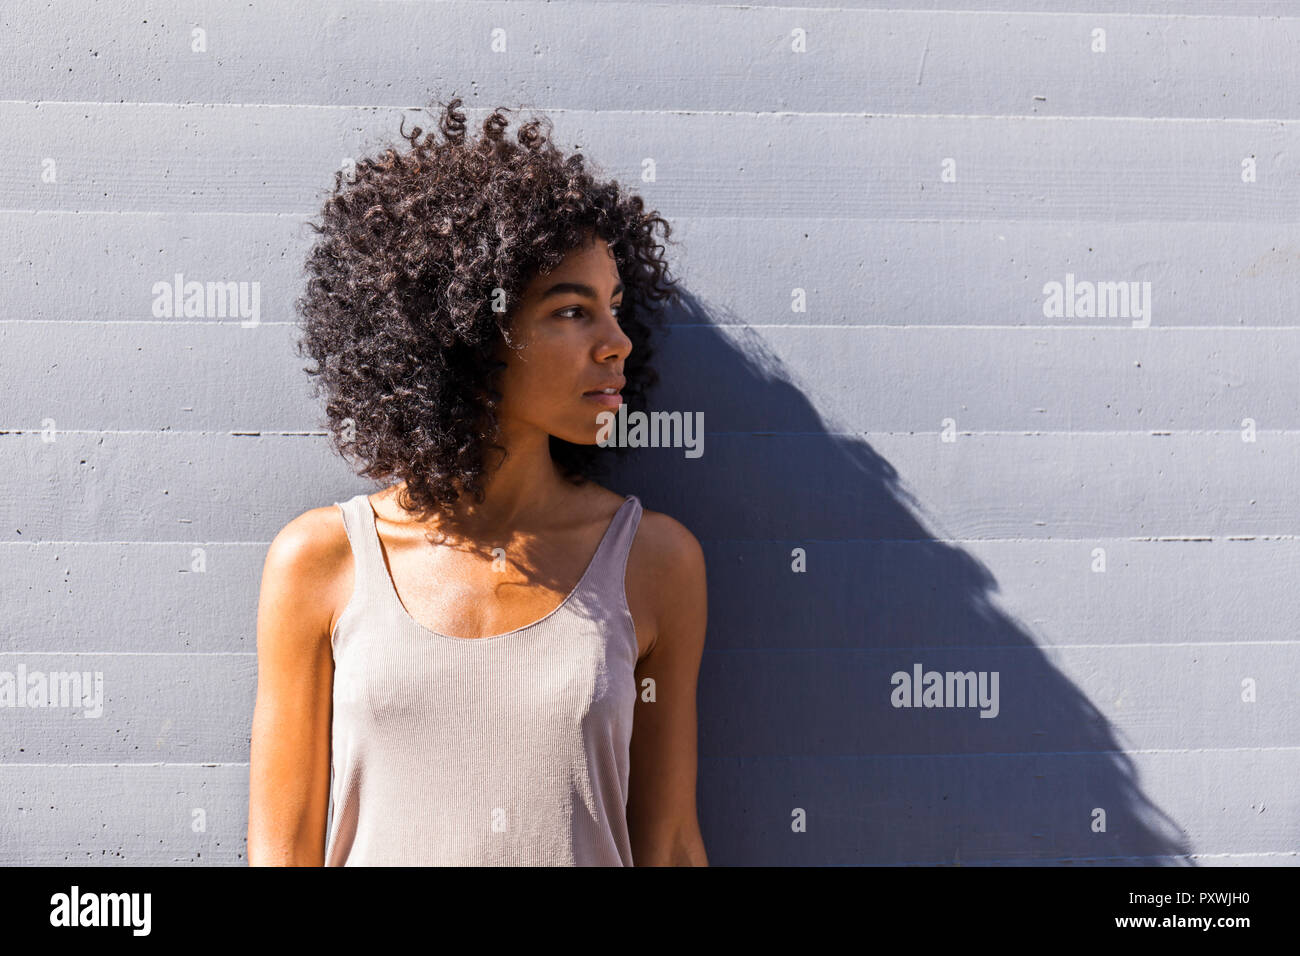 Young woman with curly hair waiting Stock Photo